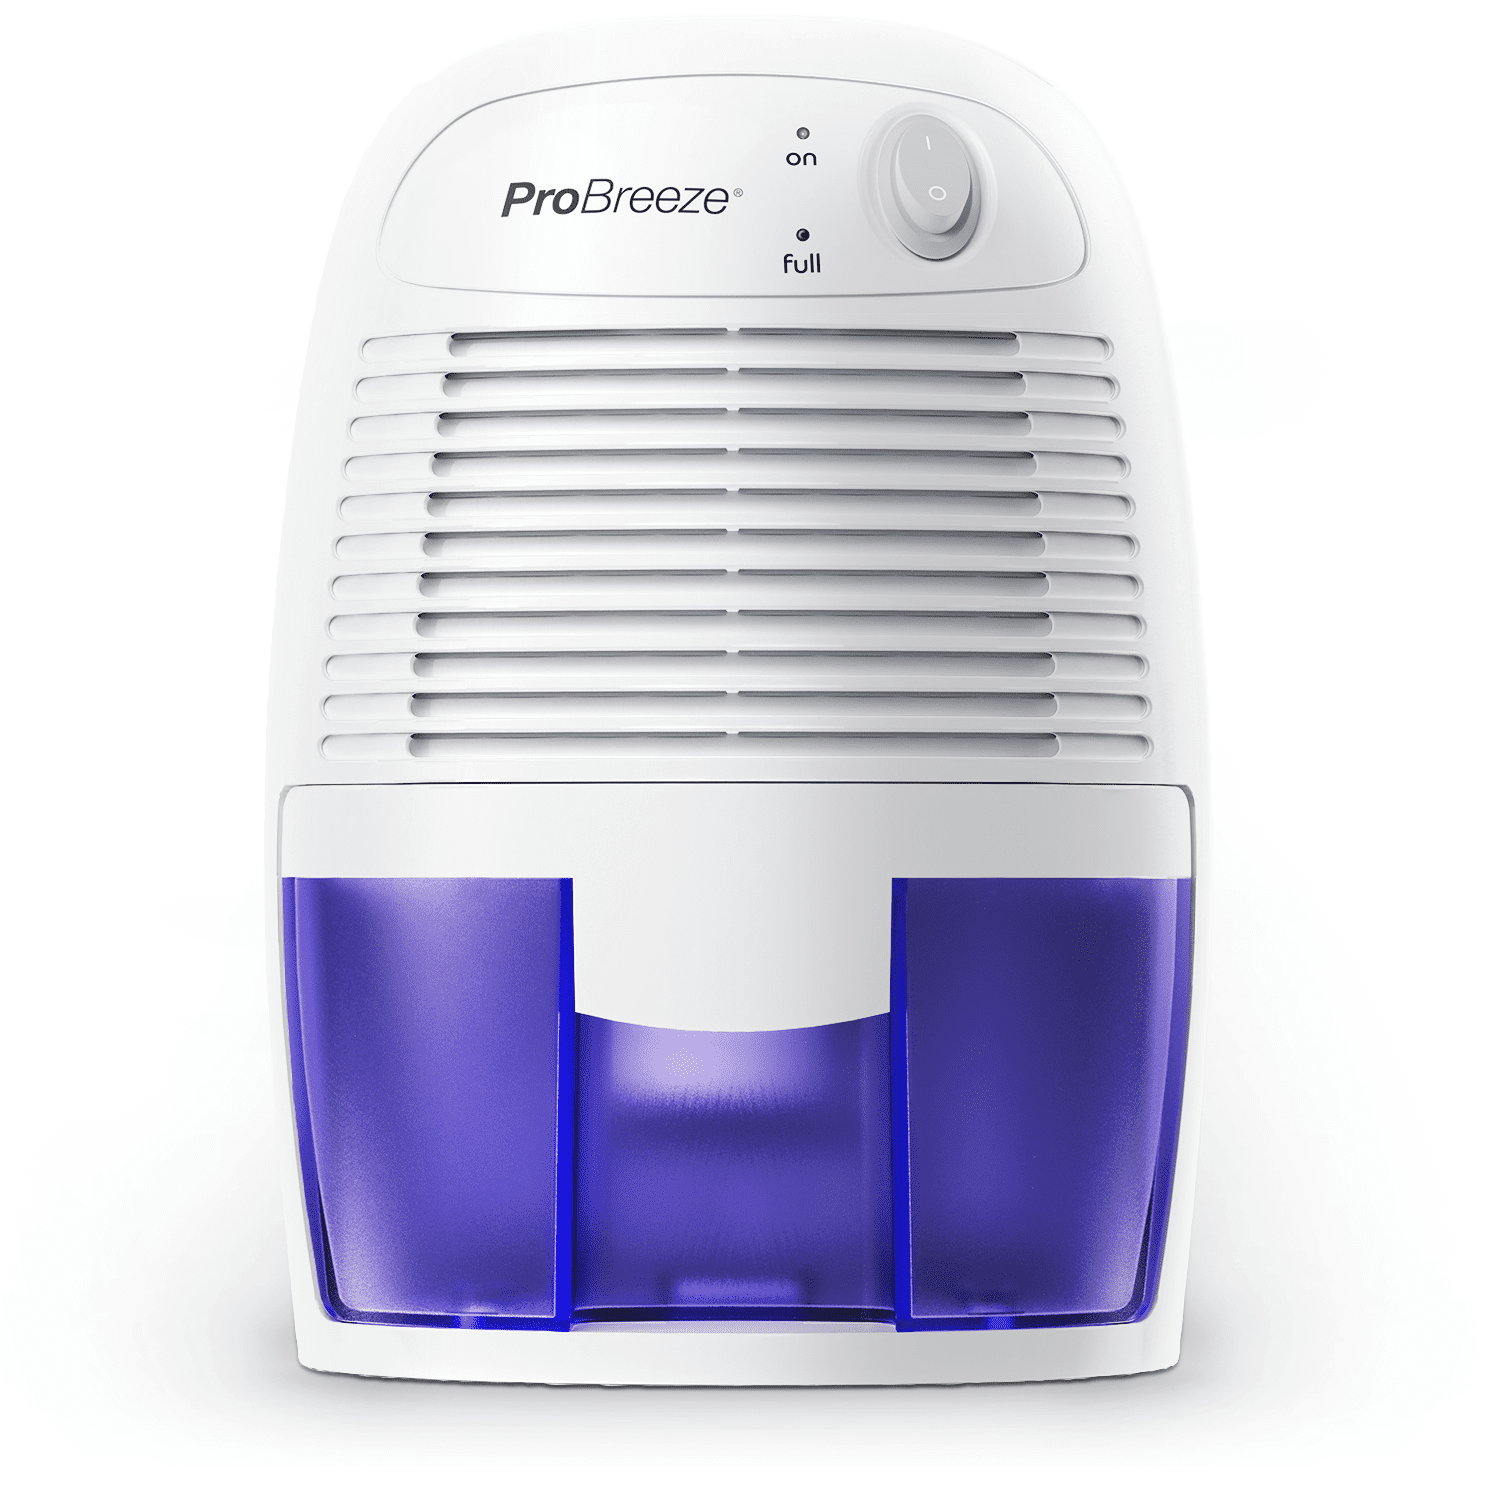 Pro Breeze 1 Pint Portable Dehumidifier for Small Rooms up to 215 sq. ft. - 0.5 Pint Moisture Removal/Day